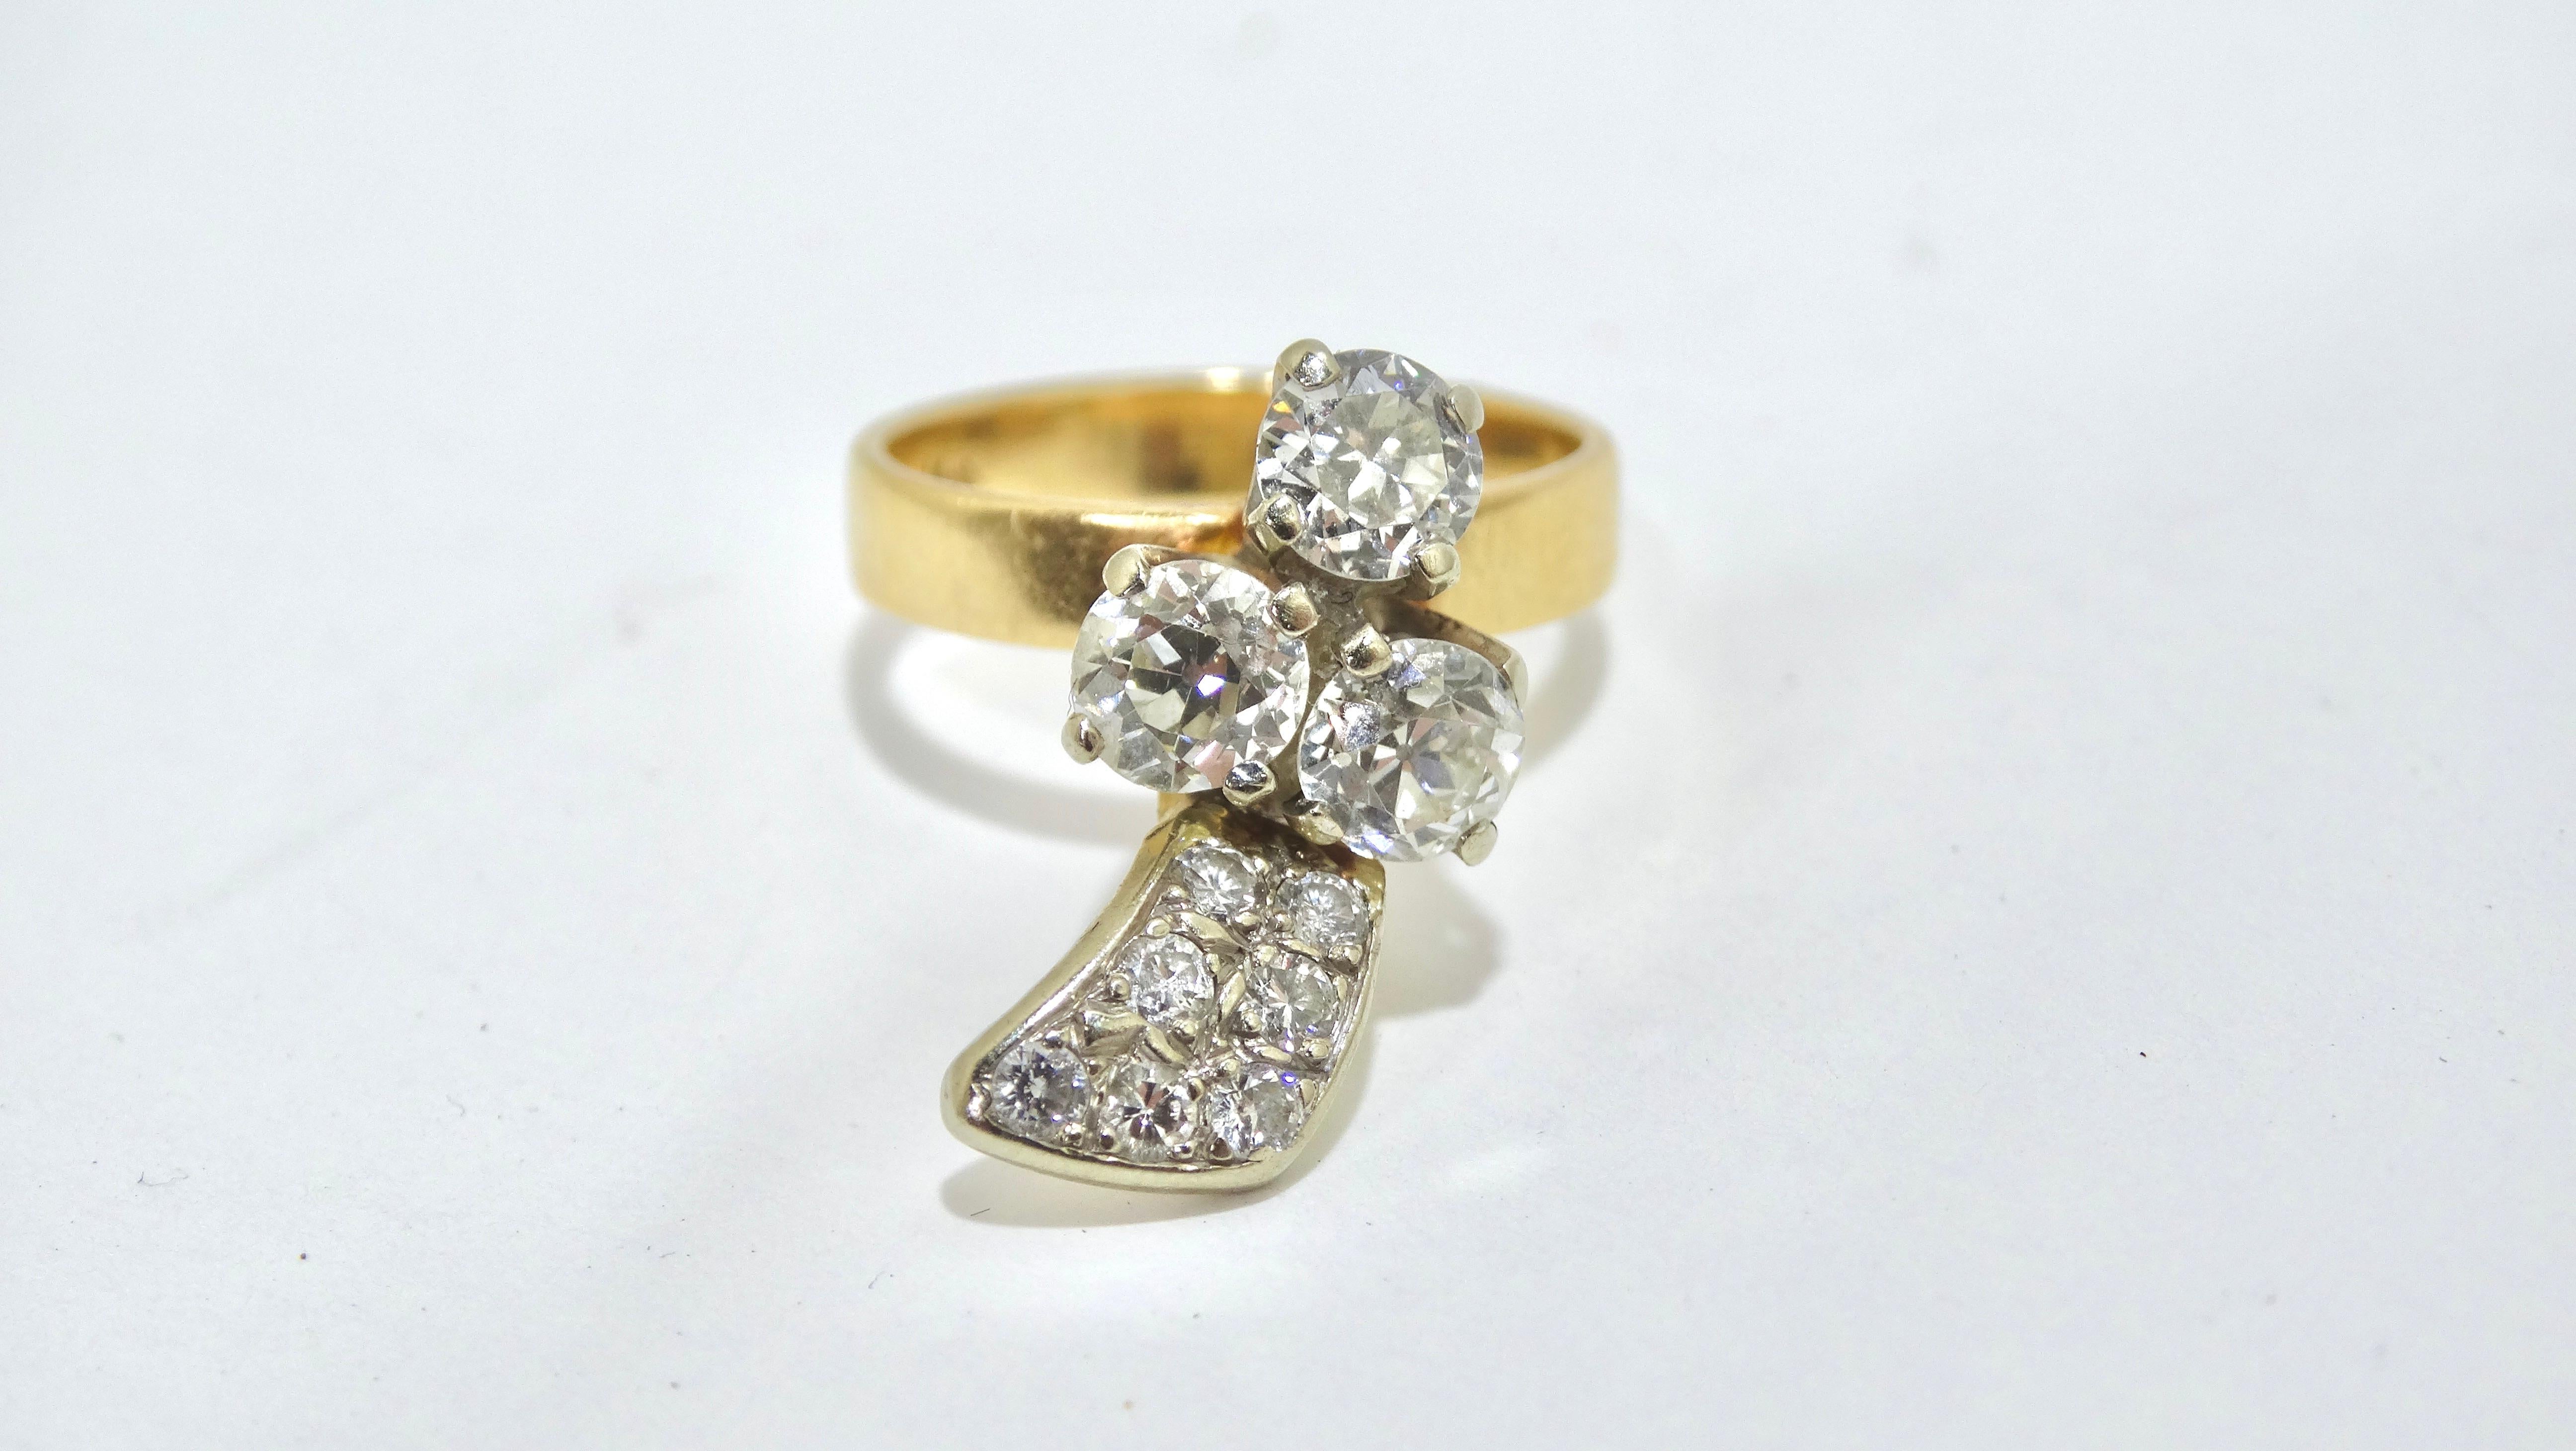 Don't miss your chance to snag a beautifully unique piece. Made up of around 1.5ct diamonds formed in an extremely unique shape, 14k gold ring. Pair with other rings to create a layered look and a Fendi monogrammed top. 3 center stones are a total